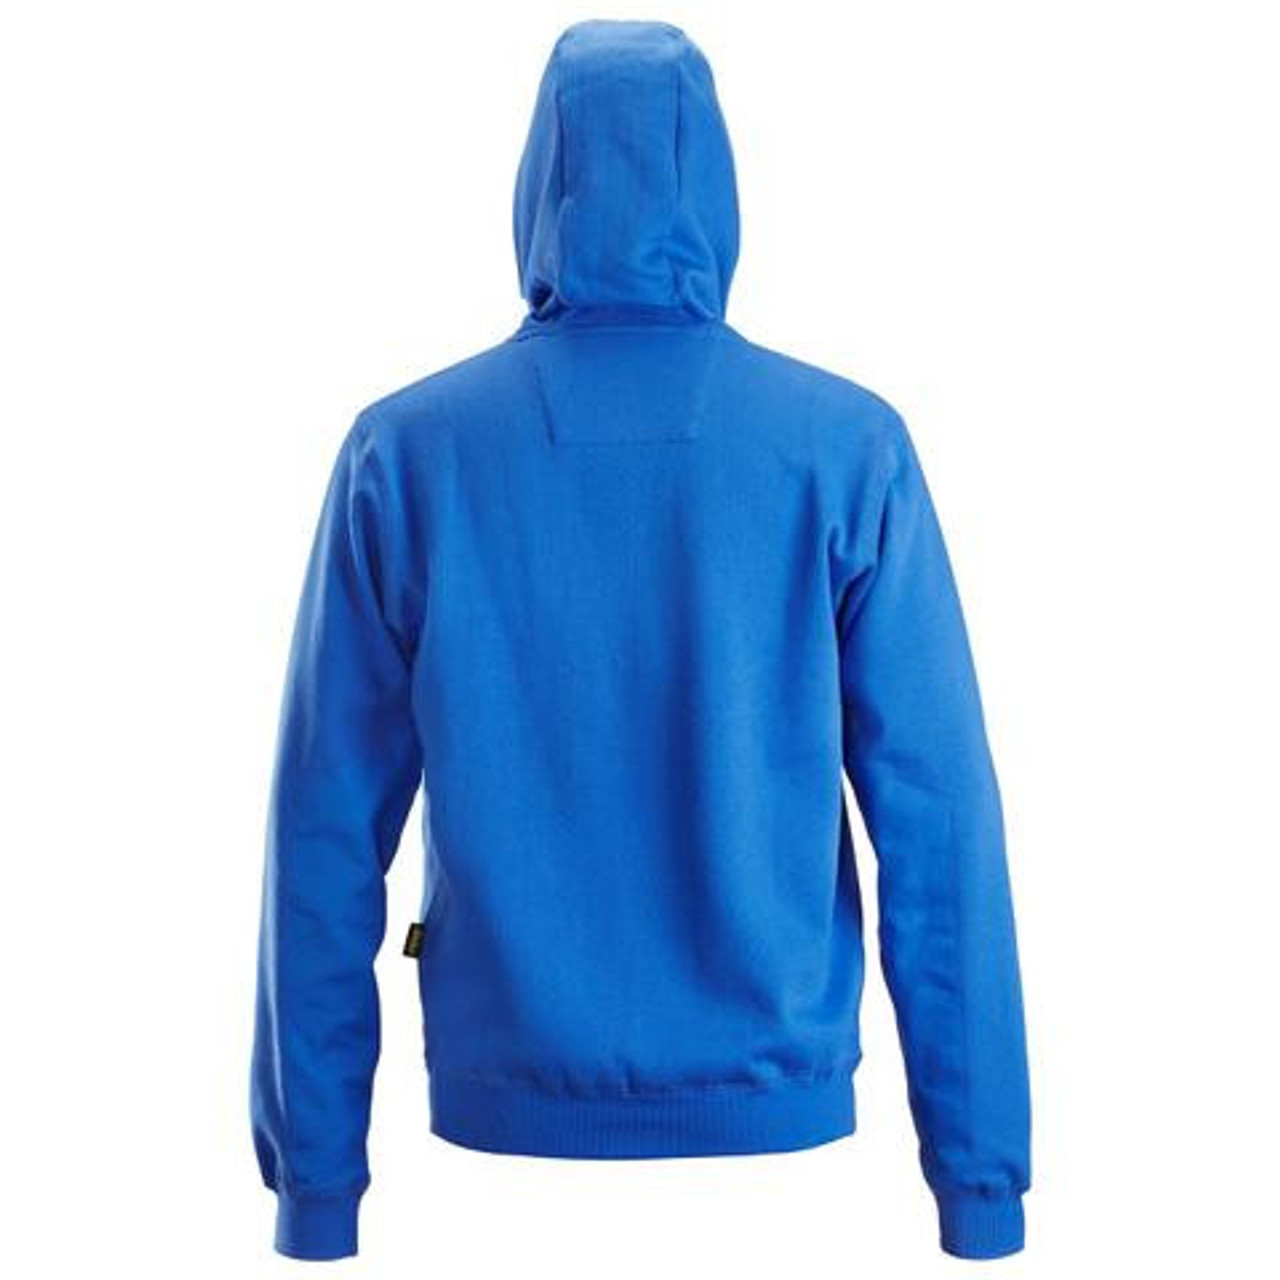 Buy online in Australia and New Zealand a Mens Blue Hoodie  for Woodworkers that are comfortable and durable.